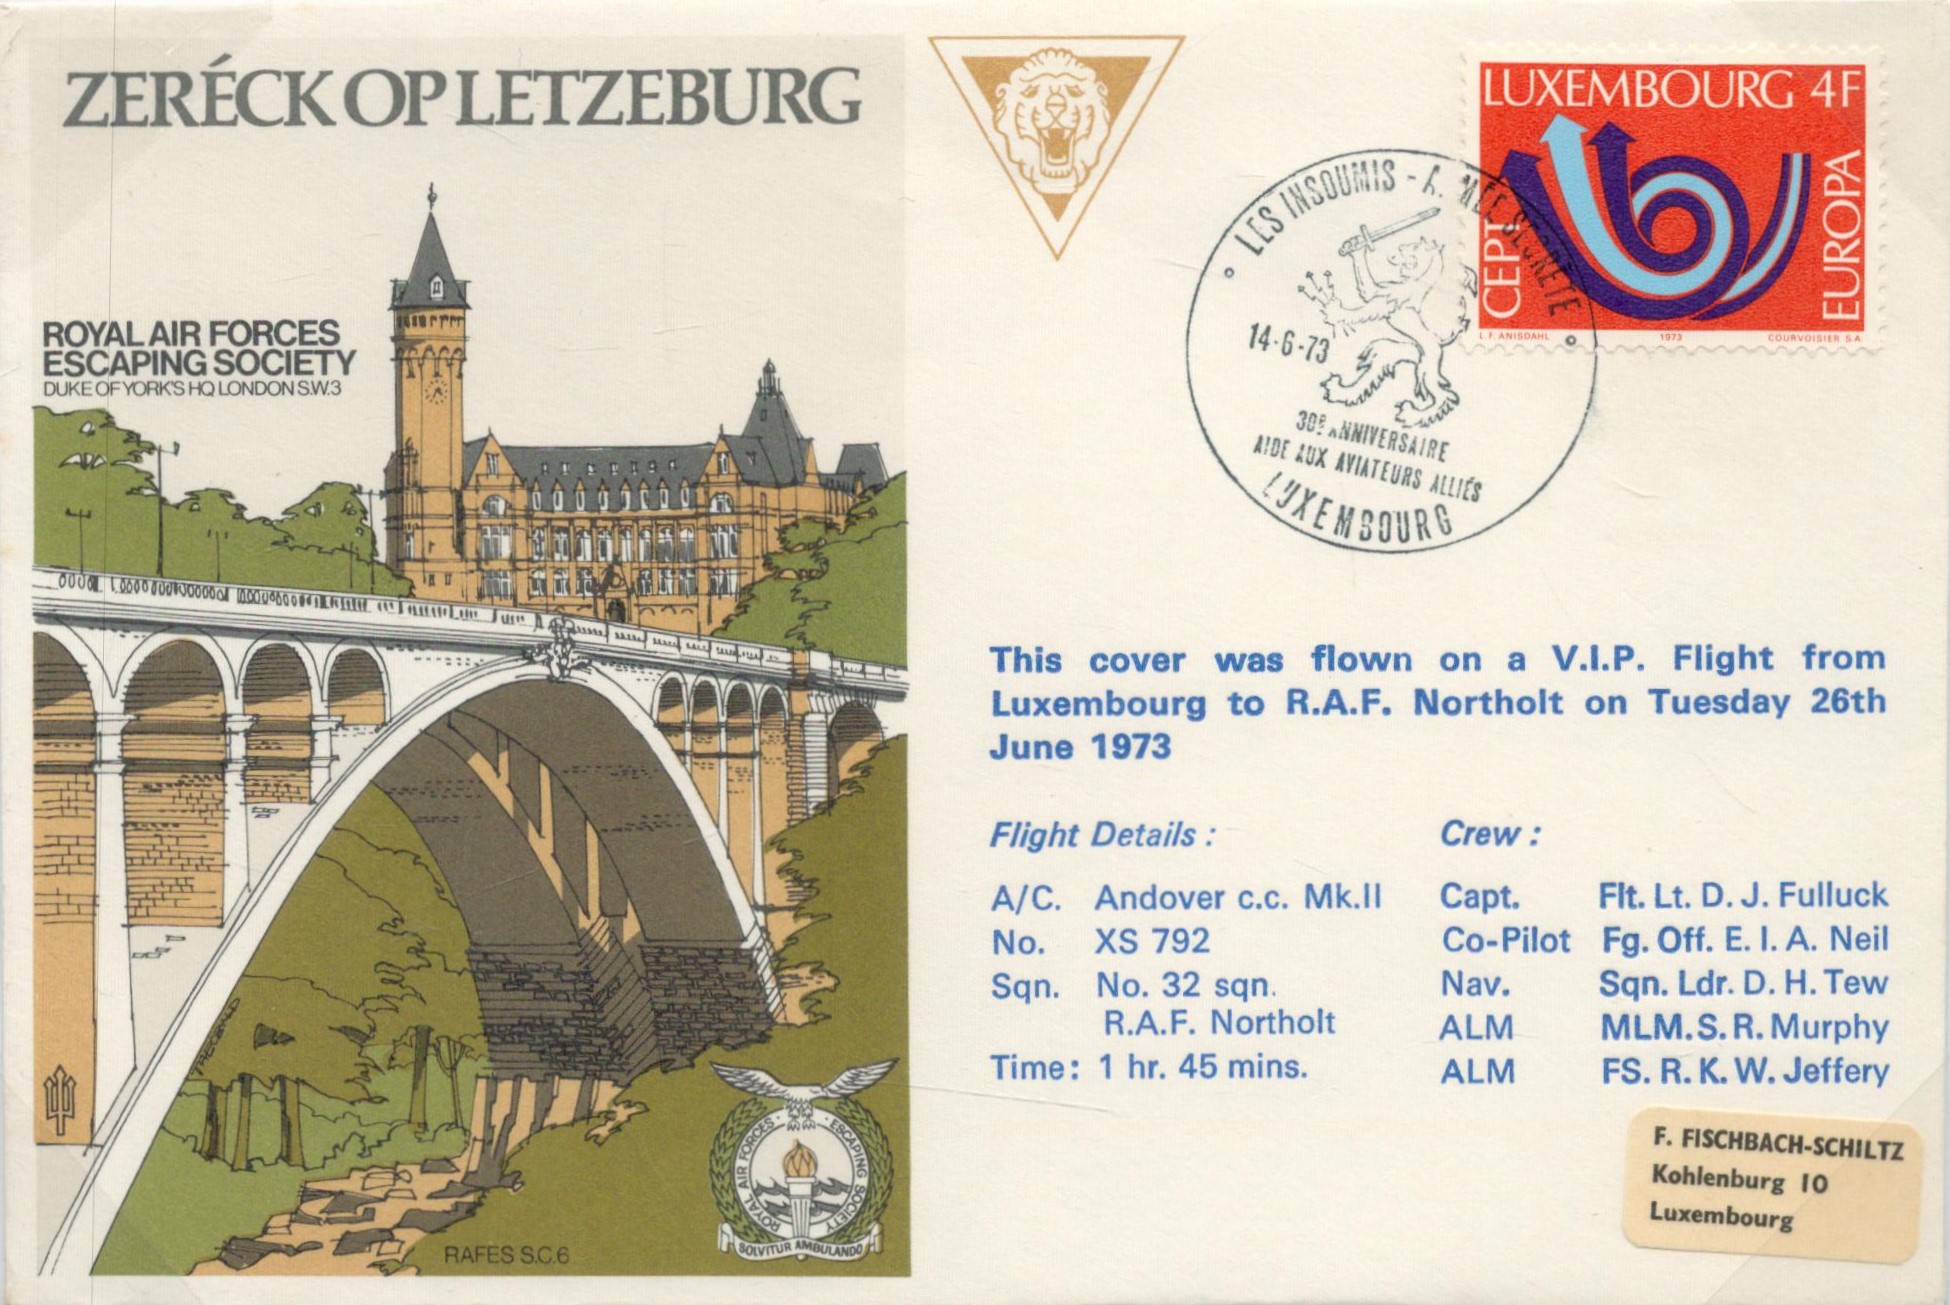 RAFES SC6 Zereck op Letzeburg Flown FDC (Royal Air Forces Escaping Society) with 4F Luxembourg Stamp